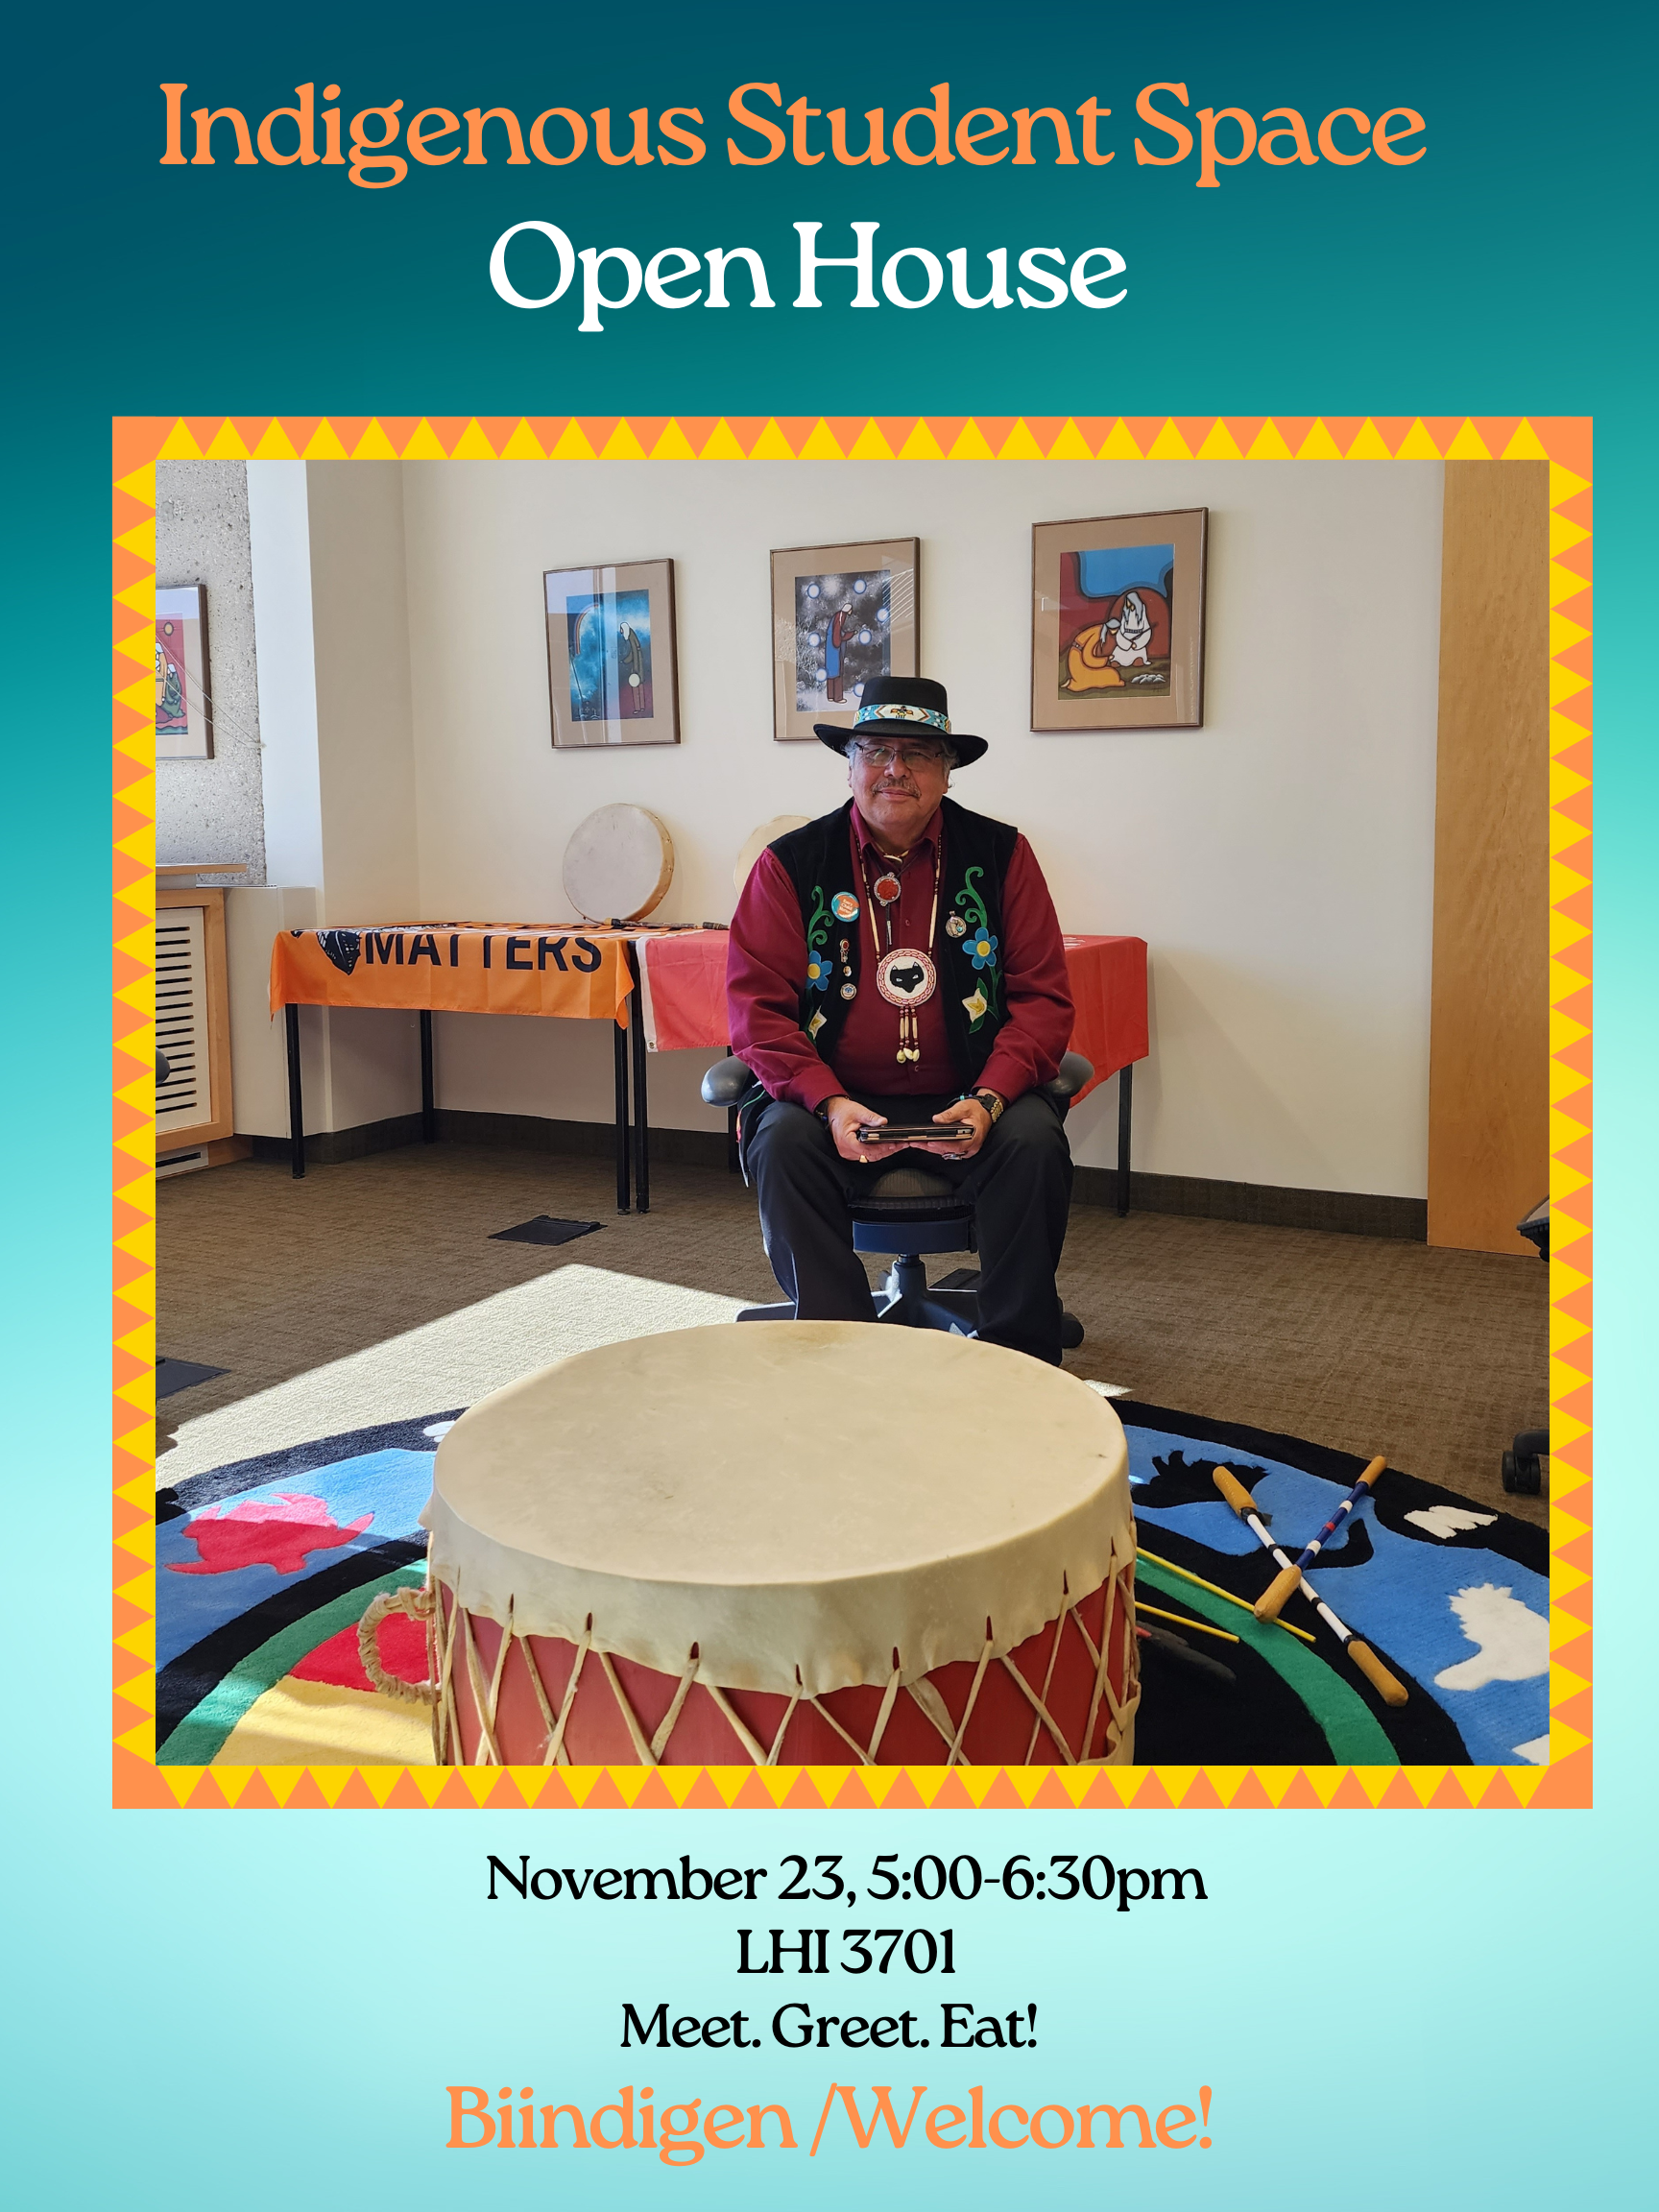 Indigenous Student Space Open House flyer